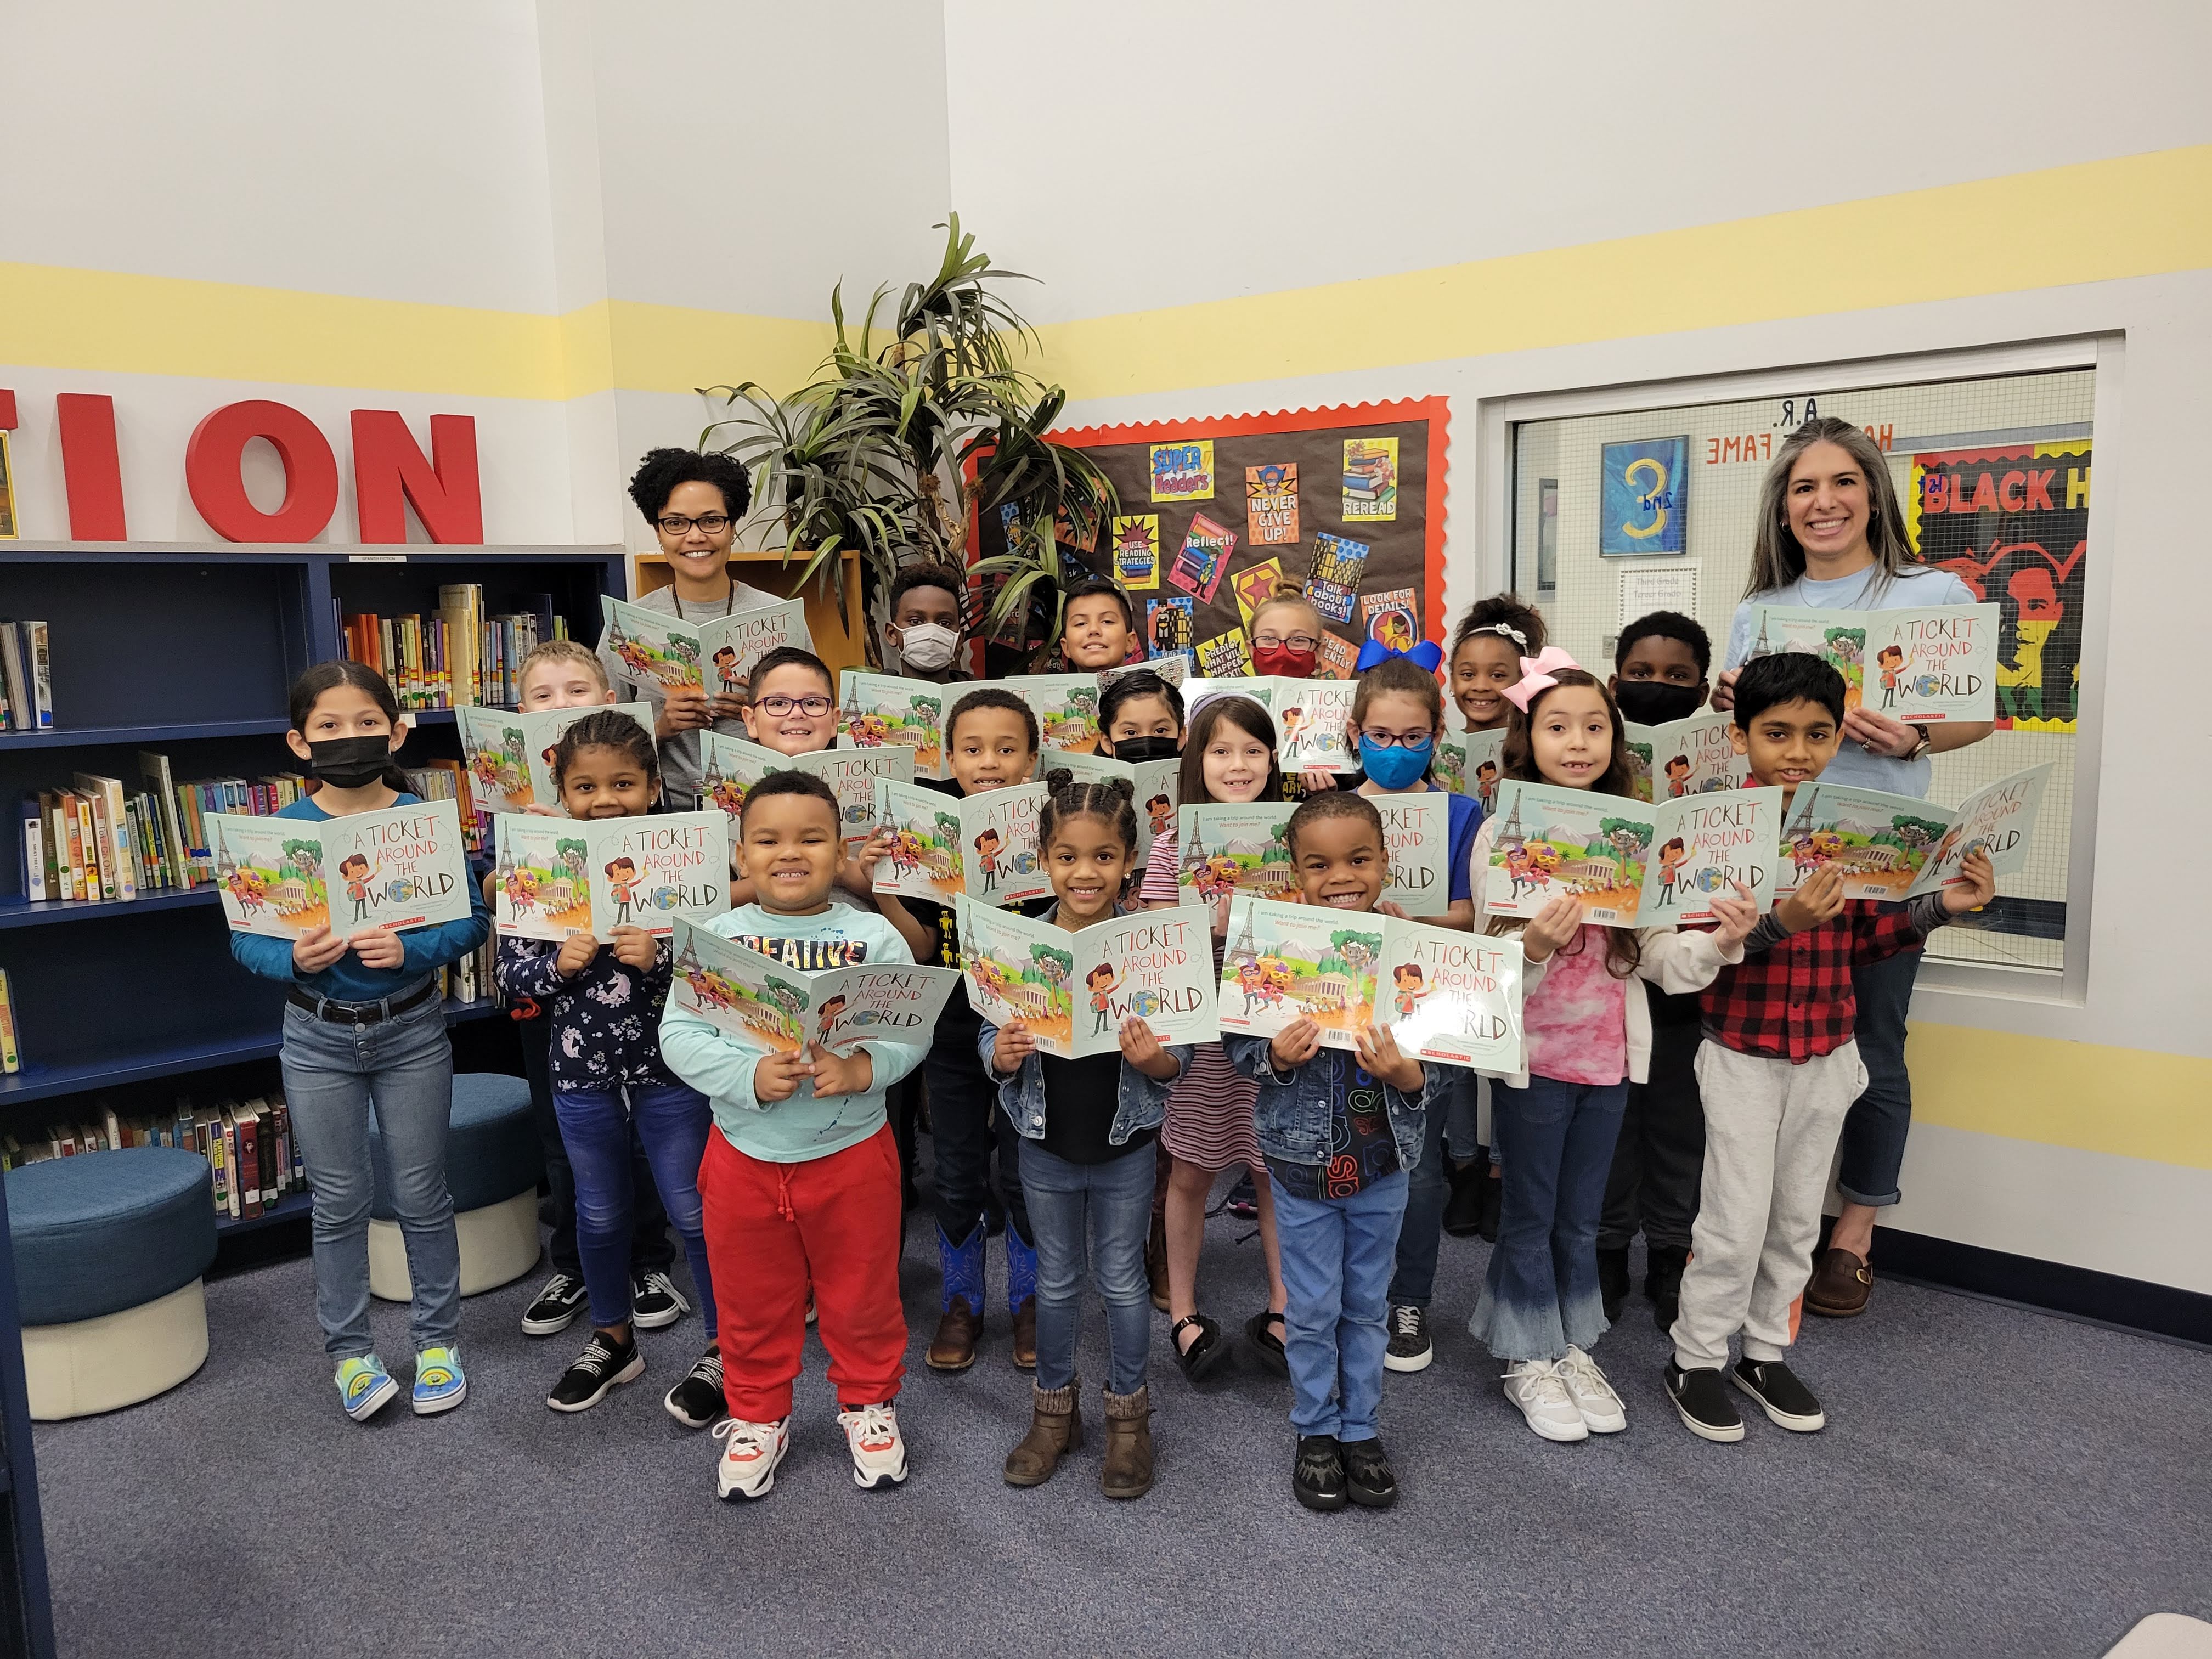 Students and librarian pose each holding a copy of the book A ticket around the world